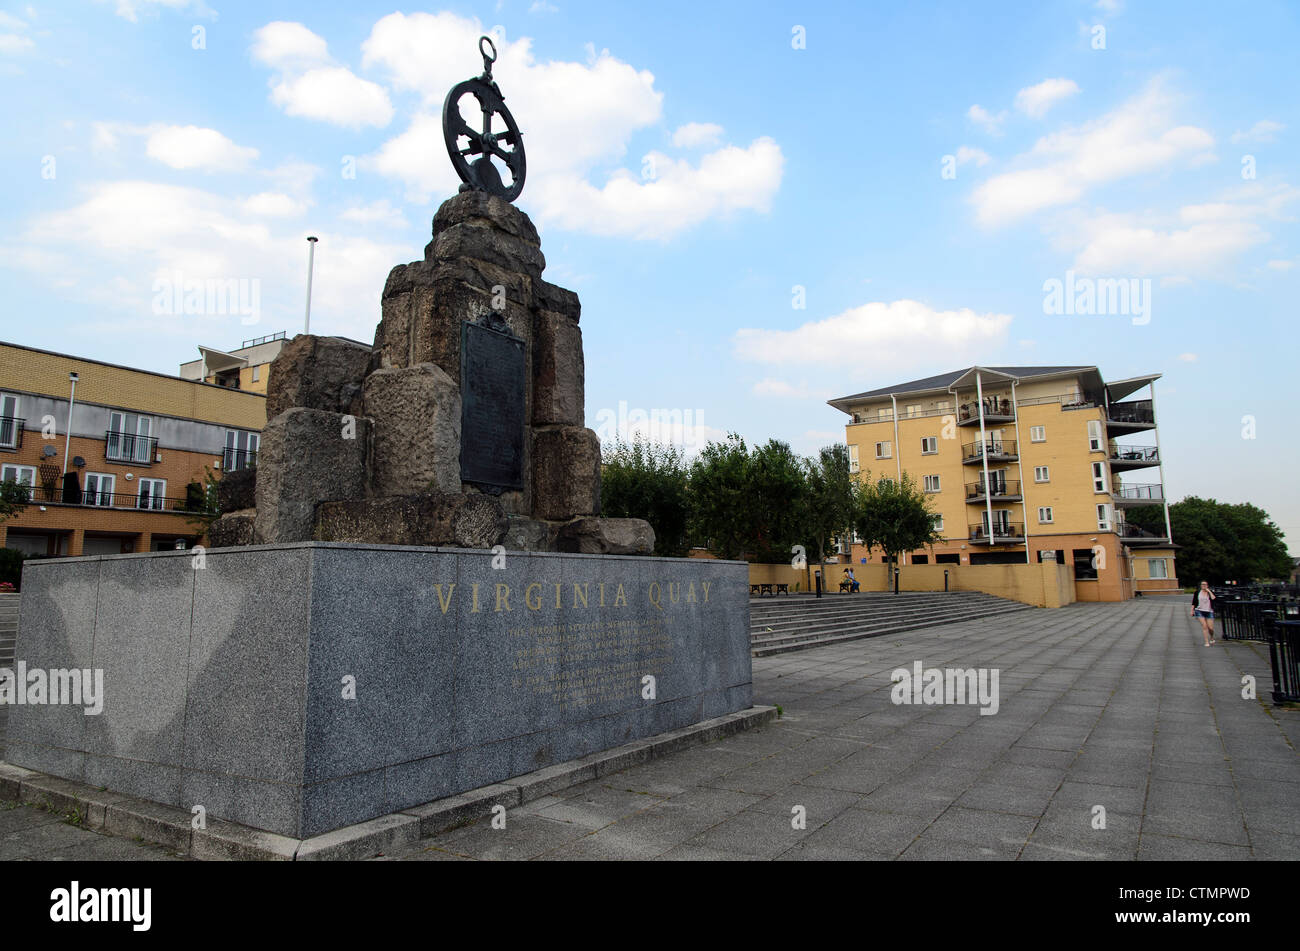 Virginia Quay settlers memorial monument in Blackwall - London, England  This Monument was first unveiled in 1928 by America's Ambassador dedicated to the 'First Settlers' who had sailed forth from the meandering reaches of the Thames at Blackwall on a murky December's day in 1606 in three small Merchant ships. King James 1 had commanded them to bring him treasure and gold from the 'New World', the venture being financed by 'The Virginia Company of London'. Stock Photo